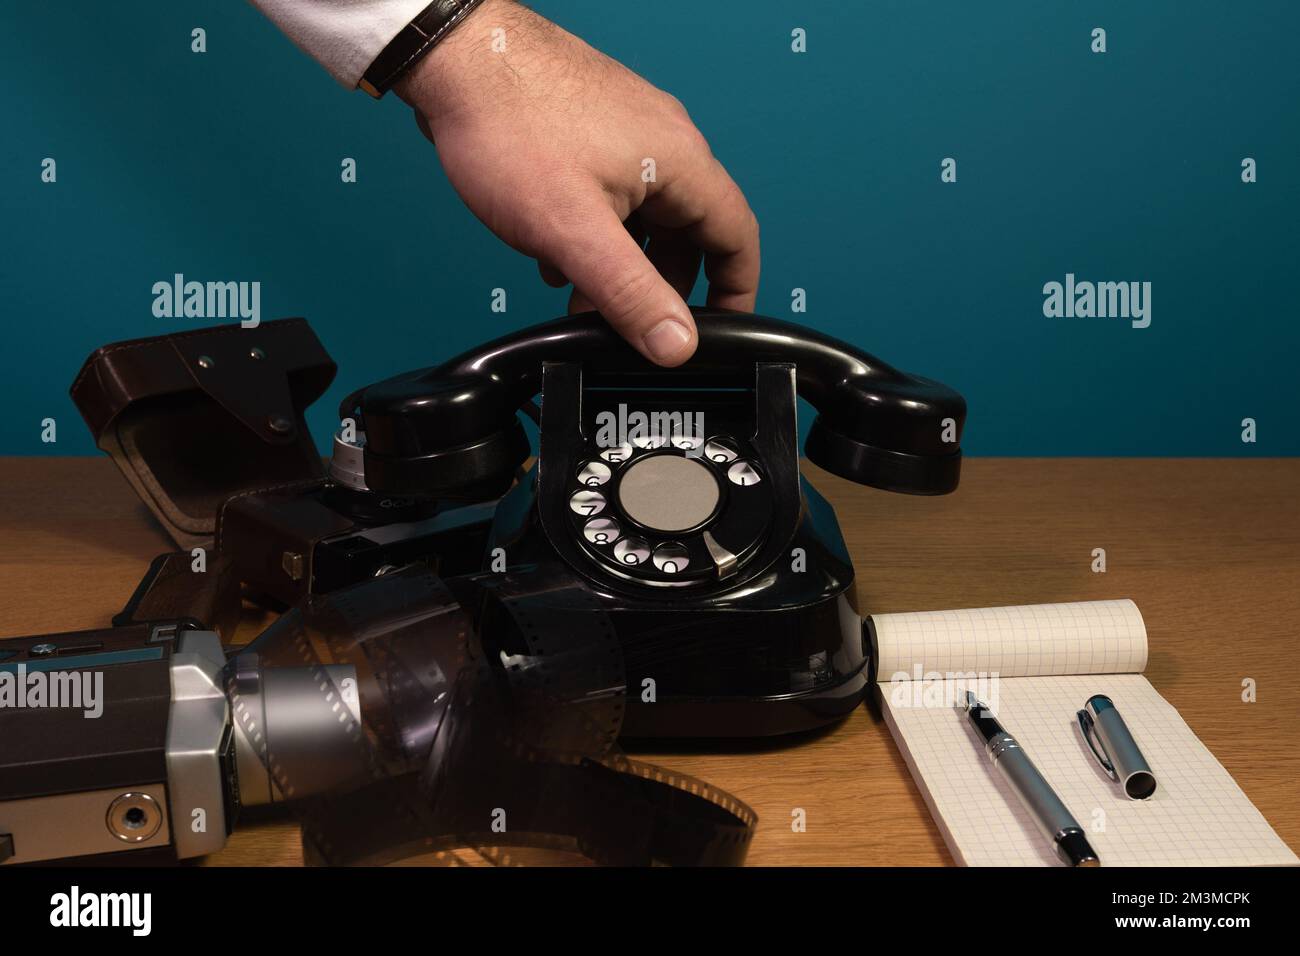 The hand reaches for the phone. Old telephone set on a wooden table, film camera Stock Photo